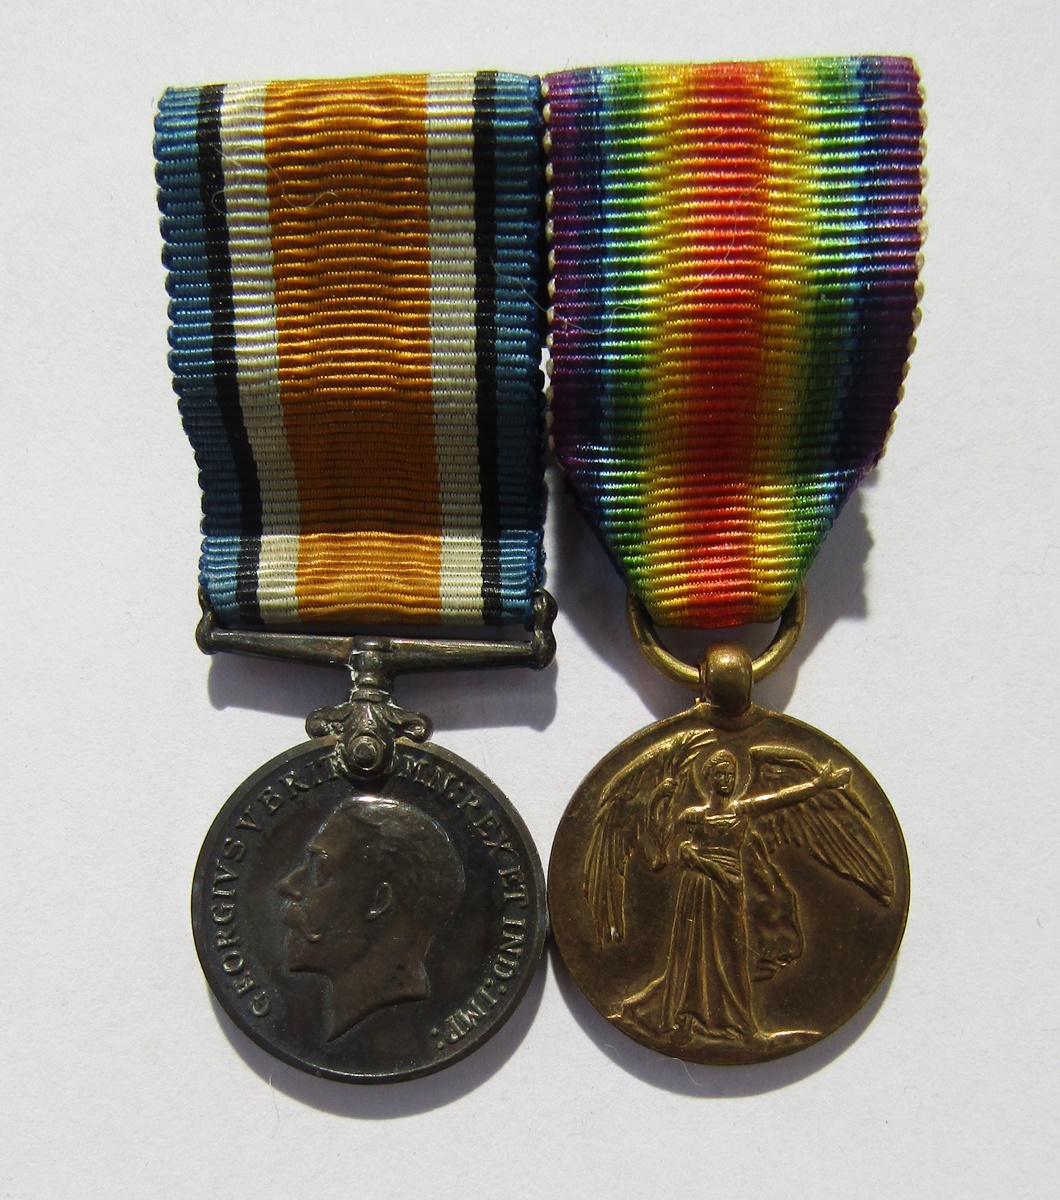 WWI medals named to "Eng.Commr.W.H.Fox.R.N.R.", "William.H.Fox" on mercantile marine medal, together - Image 7 of 9